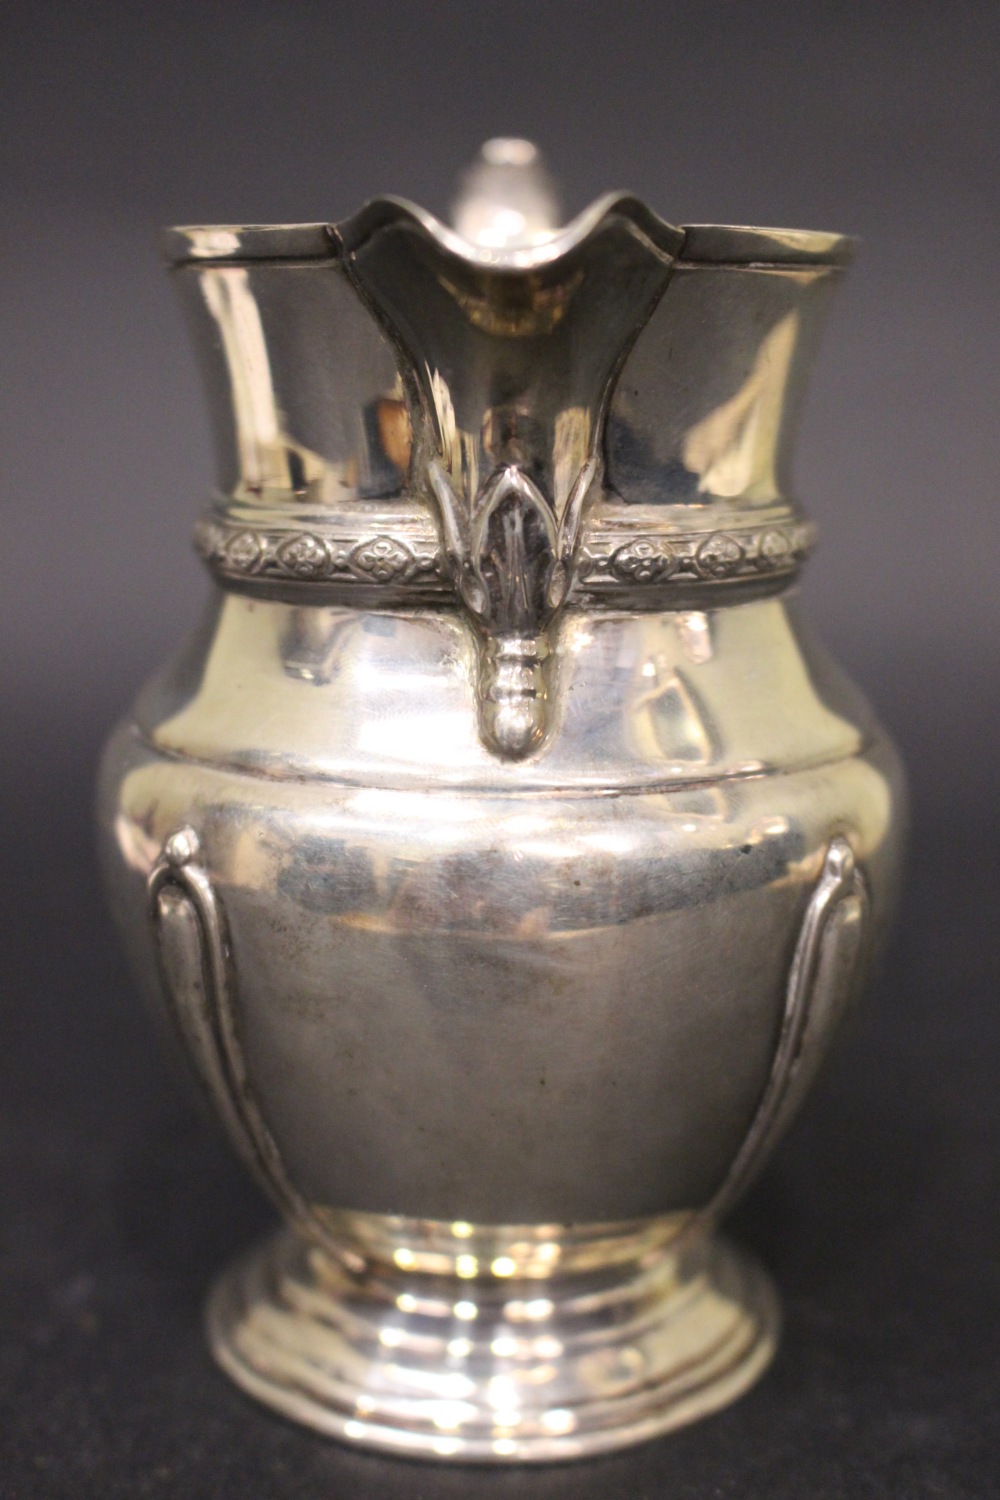 AN EARLY 20TH CENTURY SILVER ART NOUVEAU DESIGN JUG, London, date letter 'L' for 1926/27, sterling - Image 3 of 5